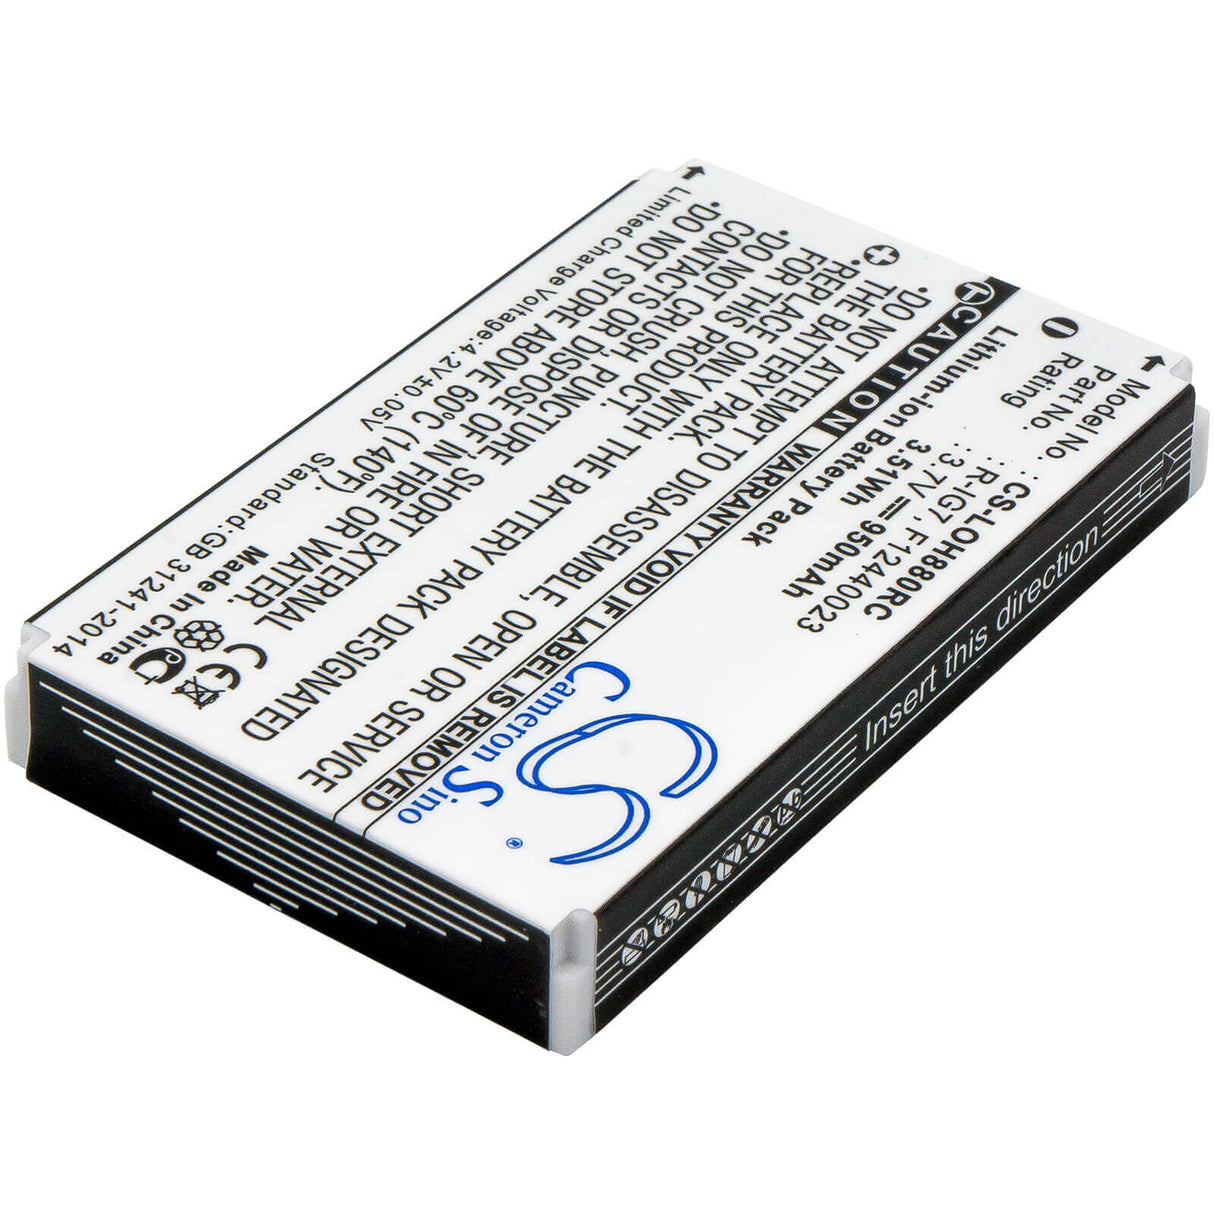 Battery For Logitech Harmony One, Harmony 880 3.7v, 950mah - 3.52wh Batteries for Electronics Cameron Sino Technology Limited   